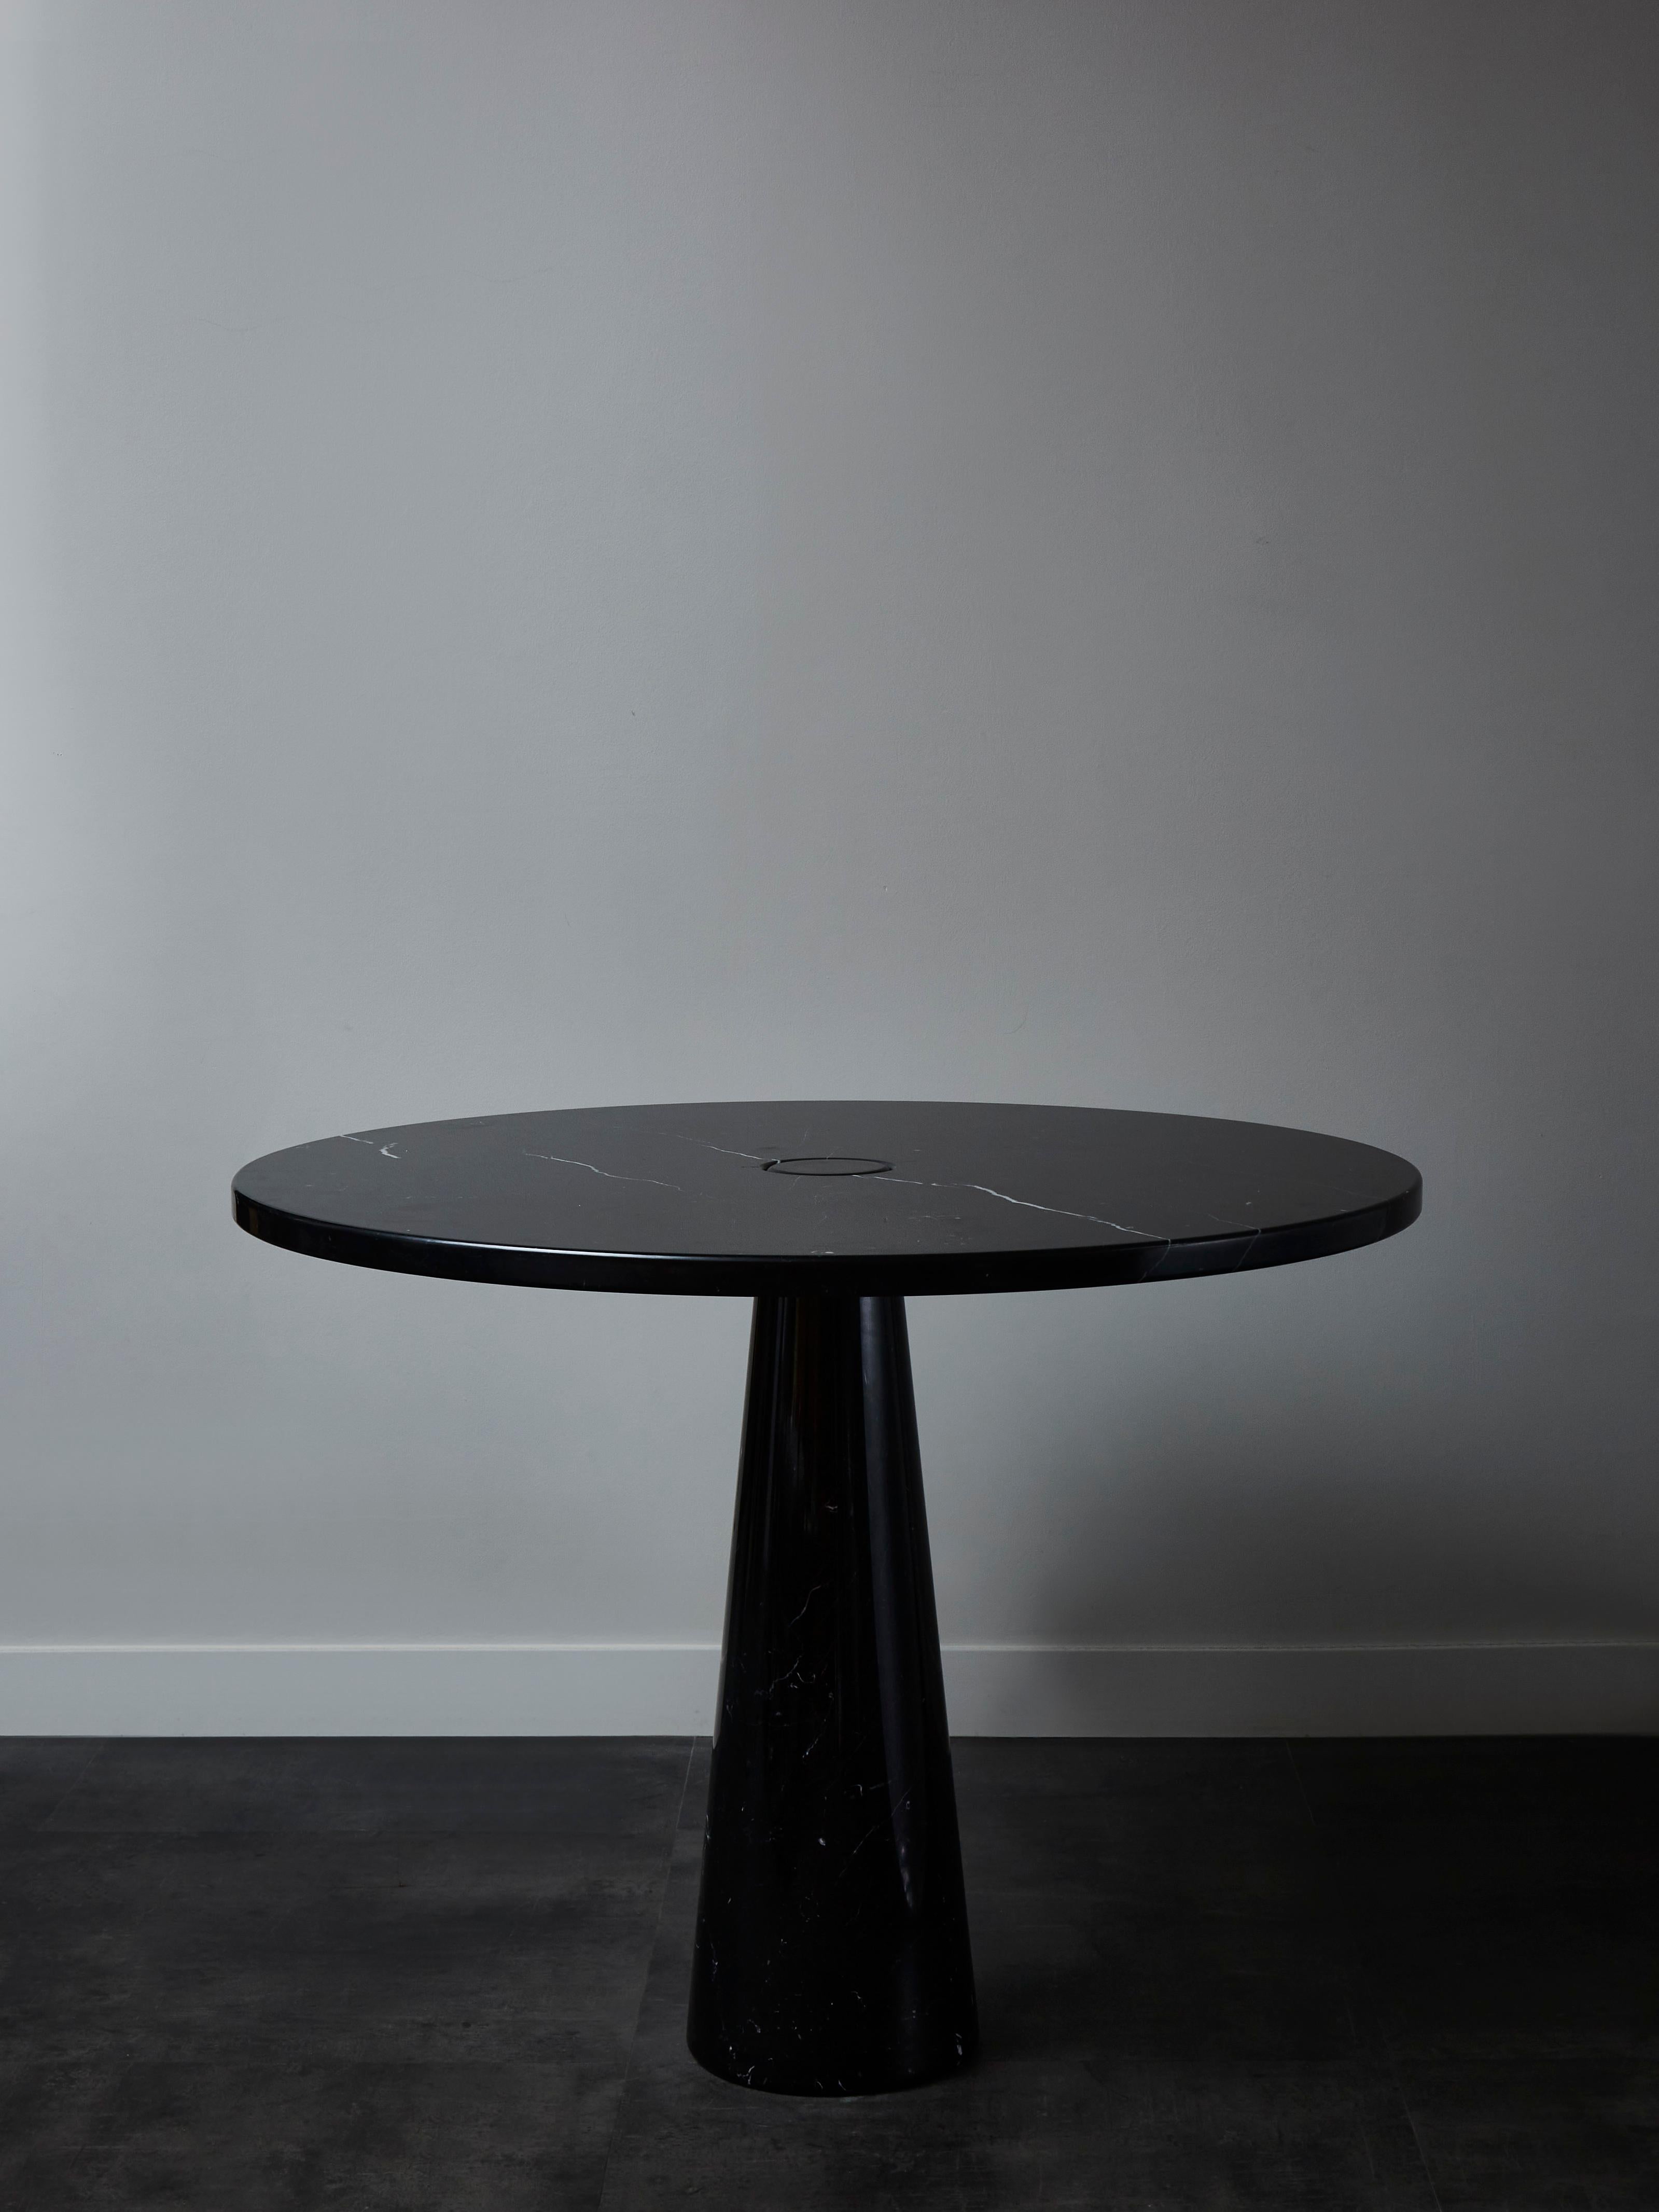 Center table model Eros by Angelo Mangiarotti for Skipper, circa 1970s

Round top set on a single center foot, both in the same deep black marble

Original sticker under the top.